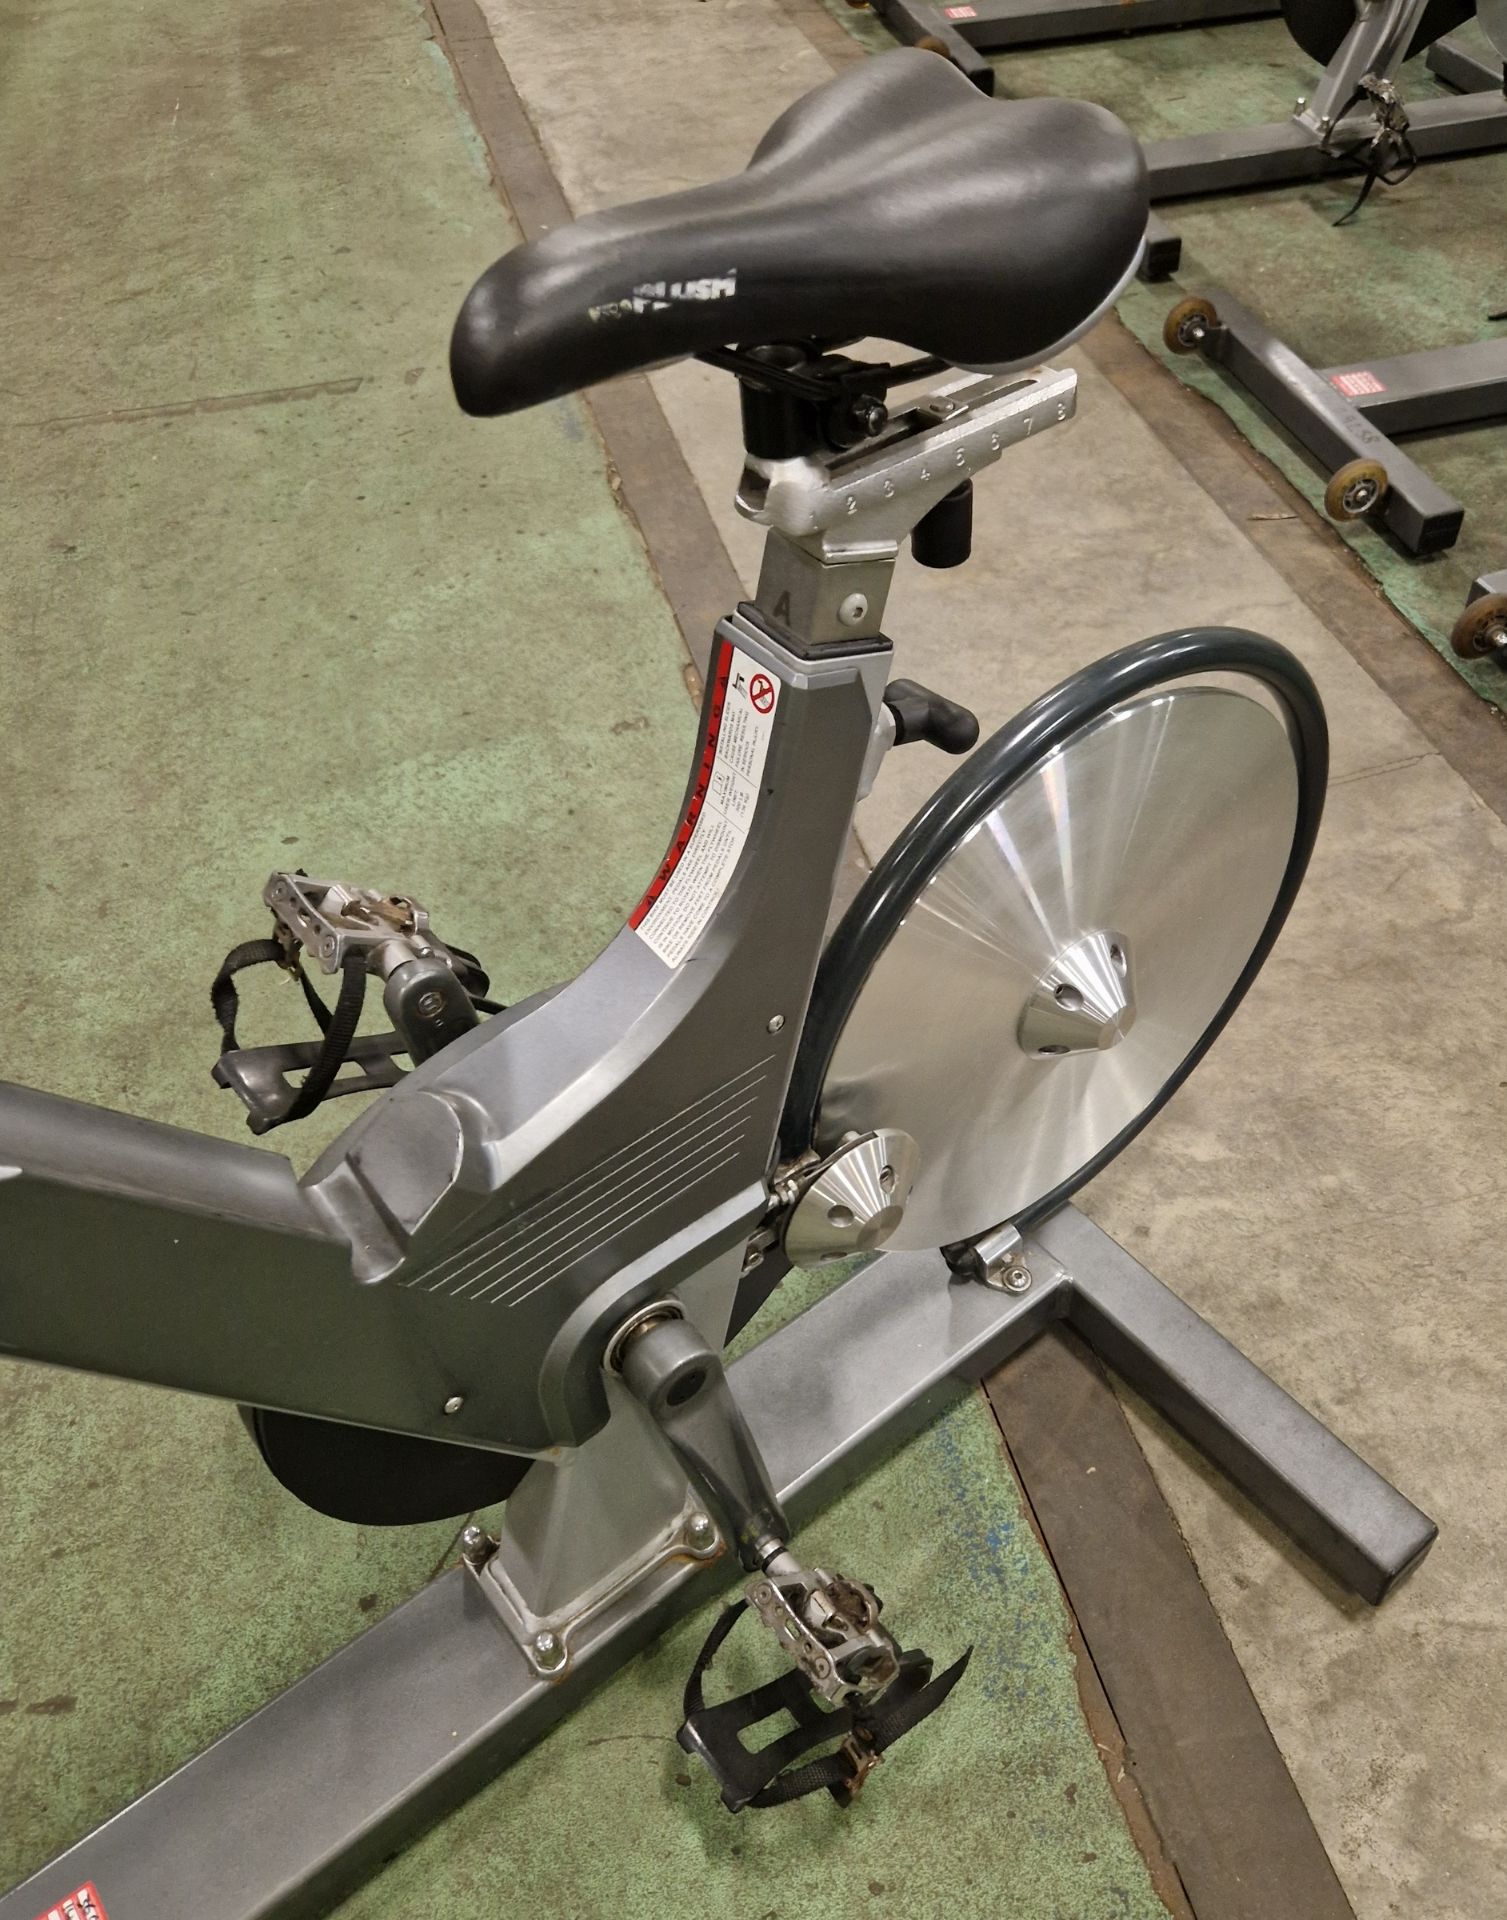 Keiser M3 exercise spin bike - NON FUNCTIONAL DISPLAY - Image 2 of 5